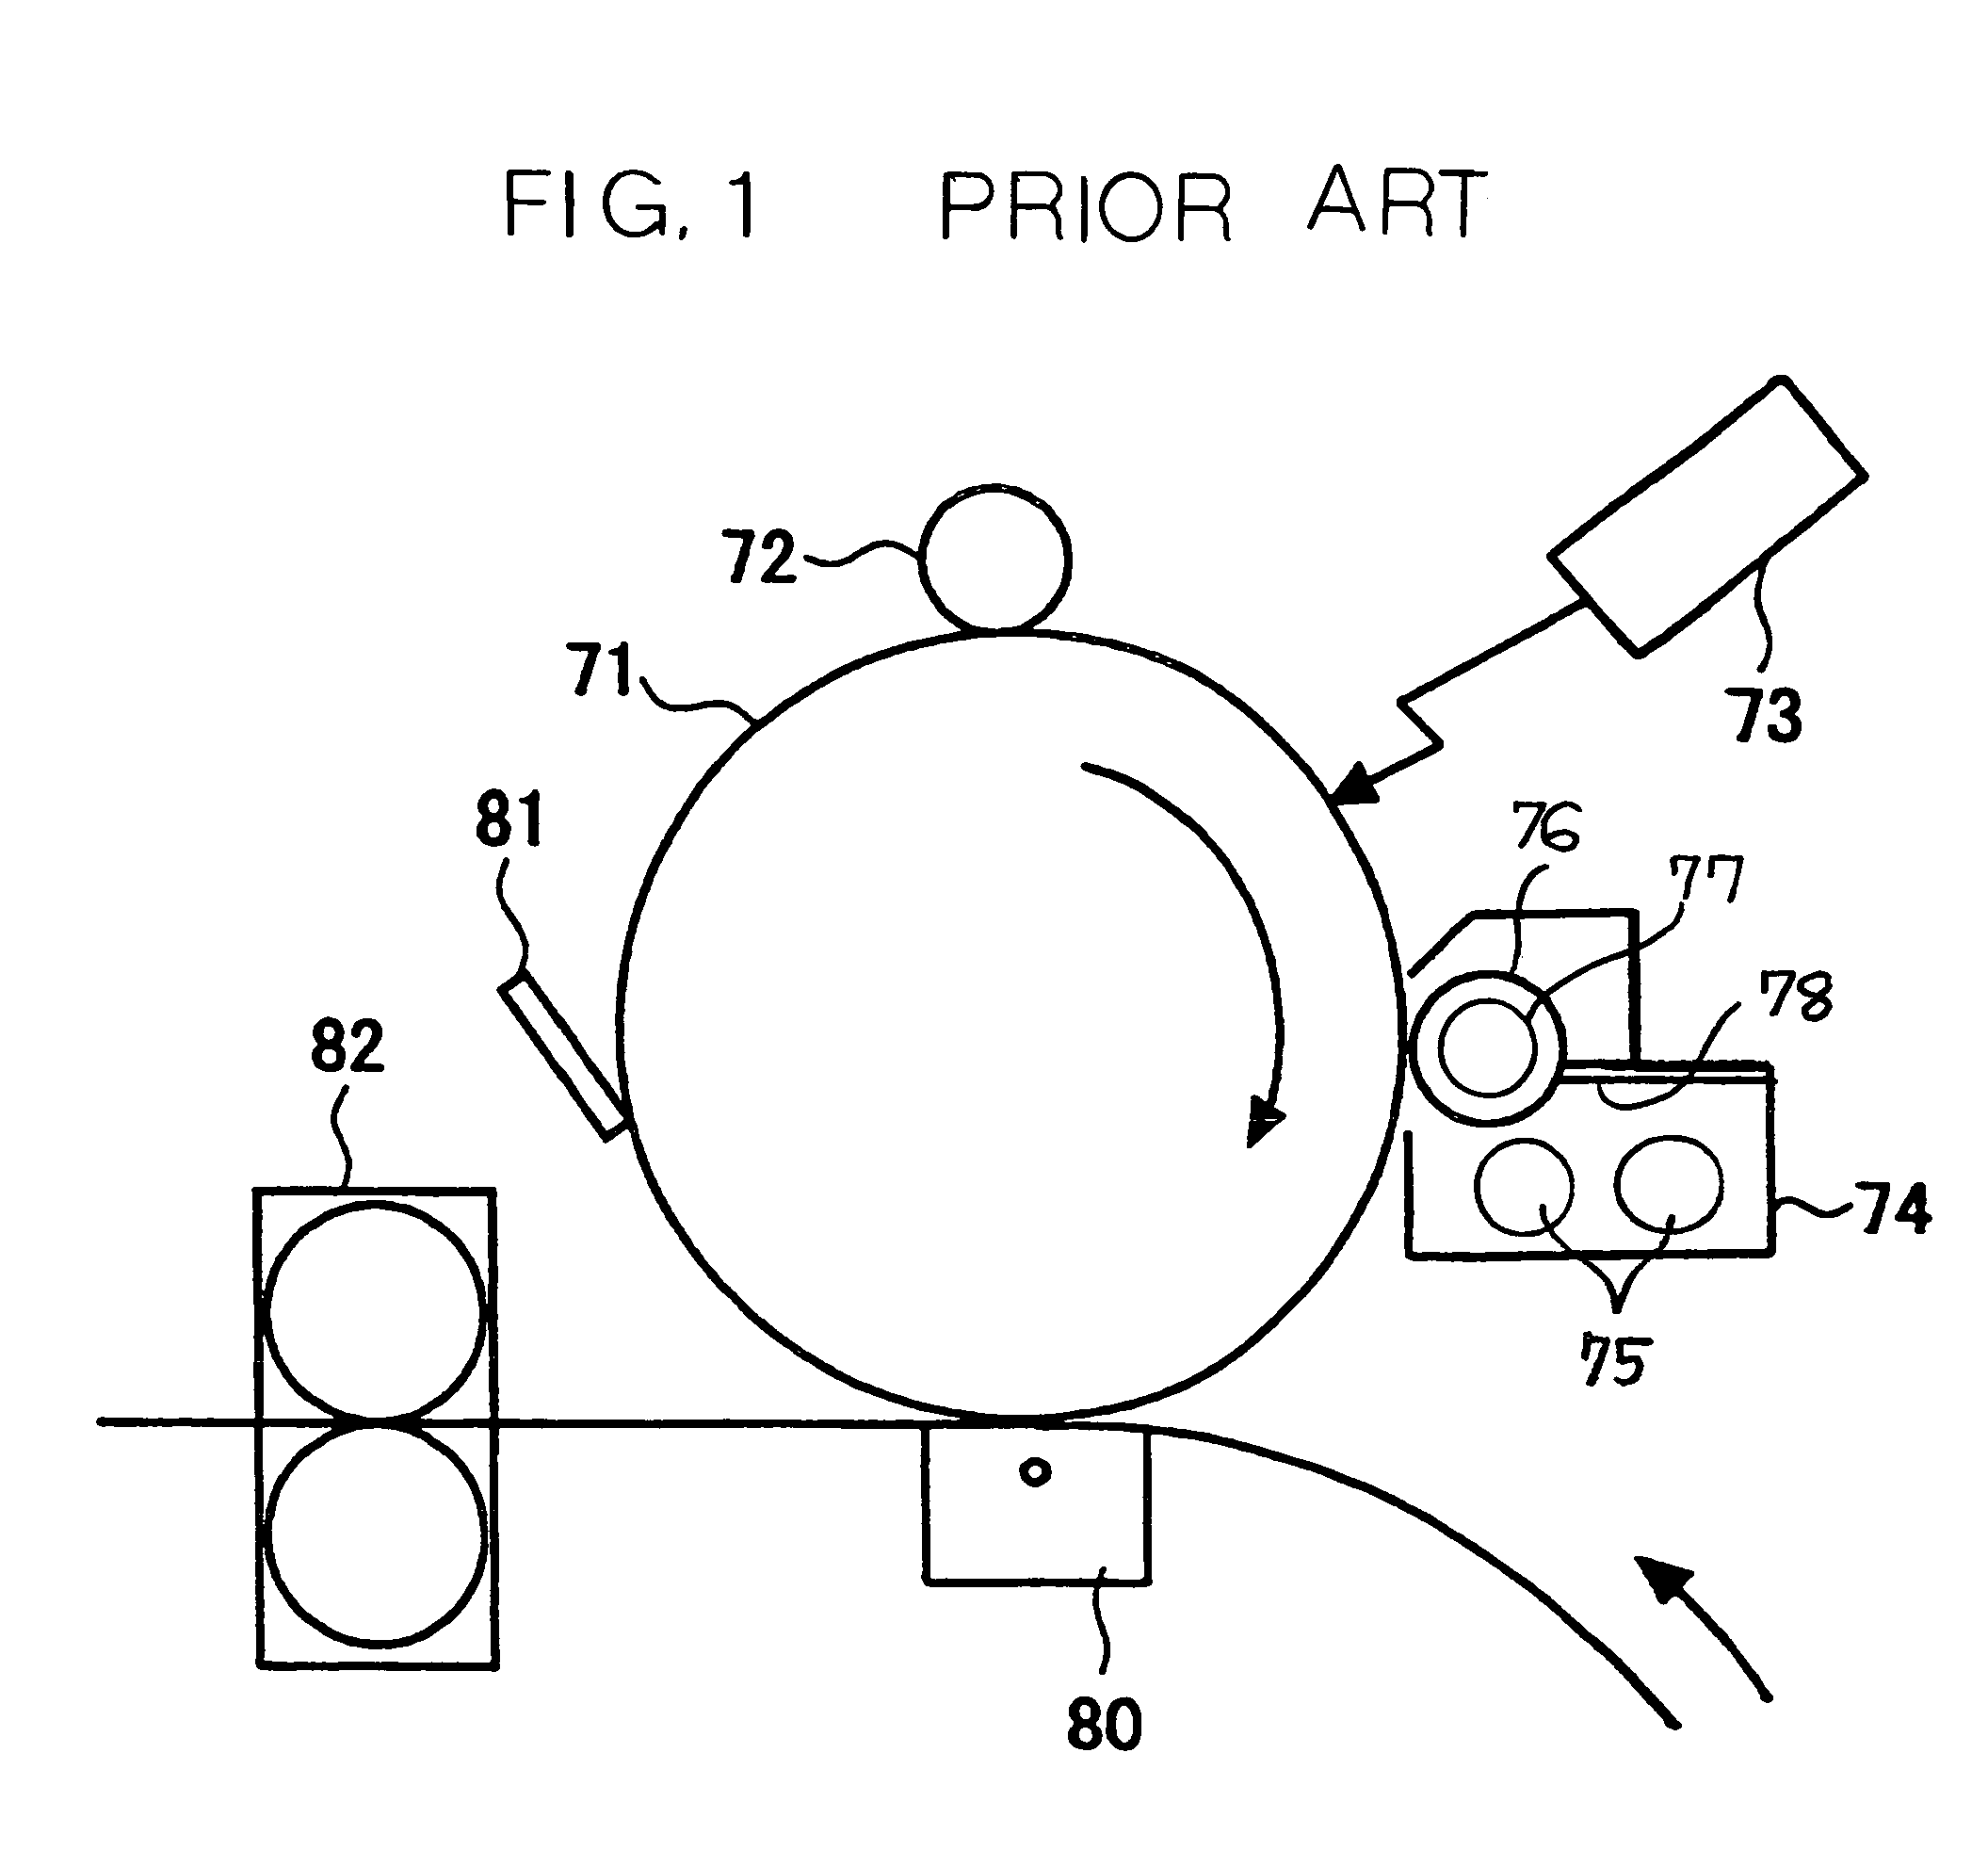 Developing apparatus for image forming apparatus